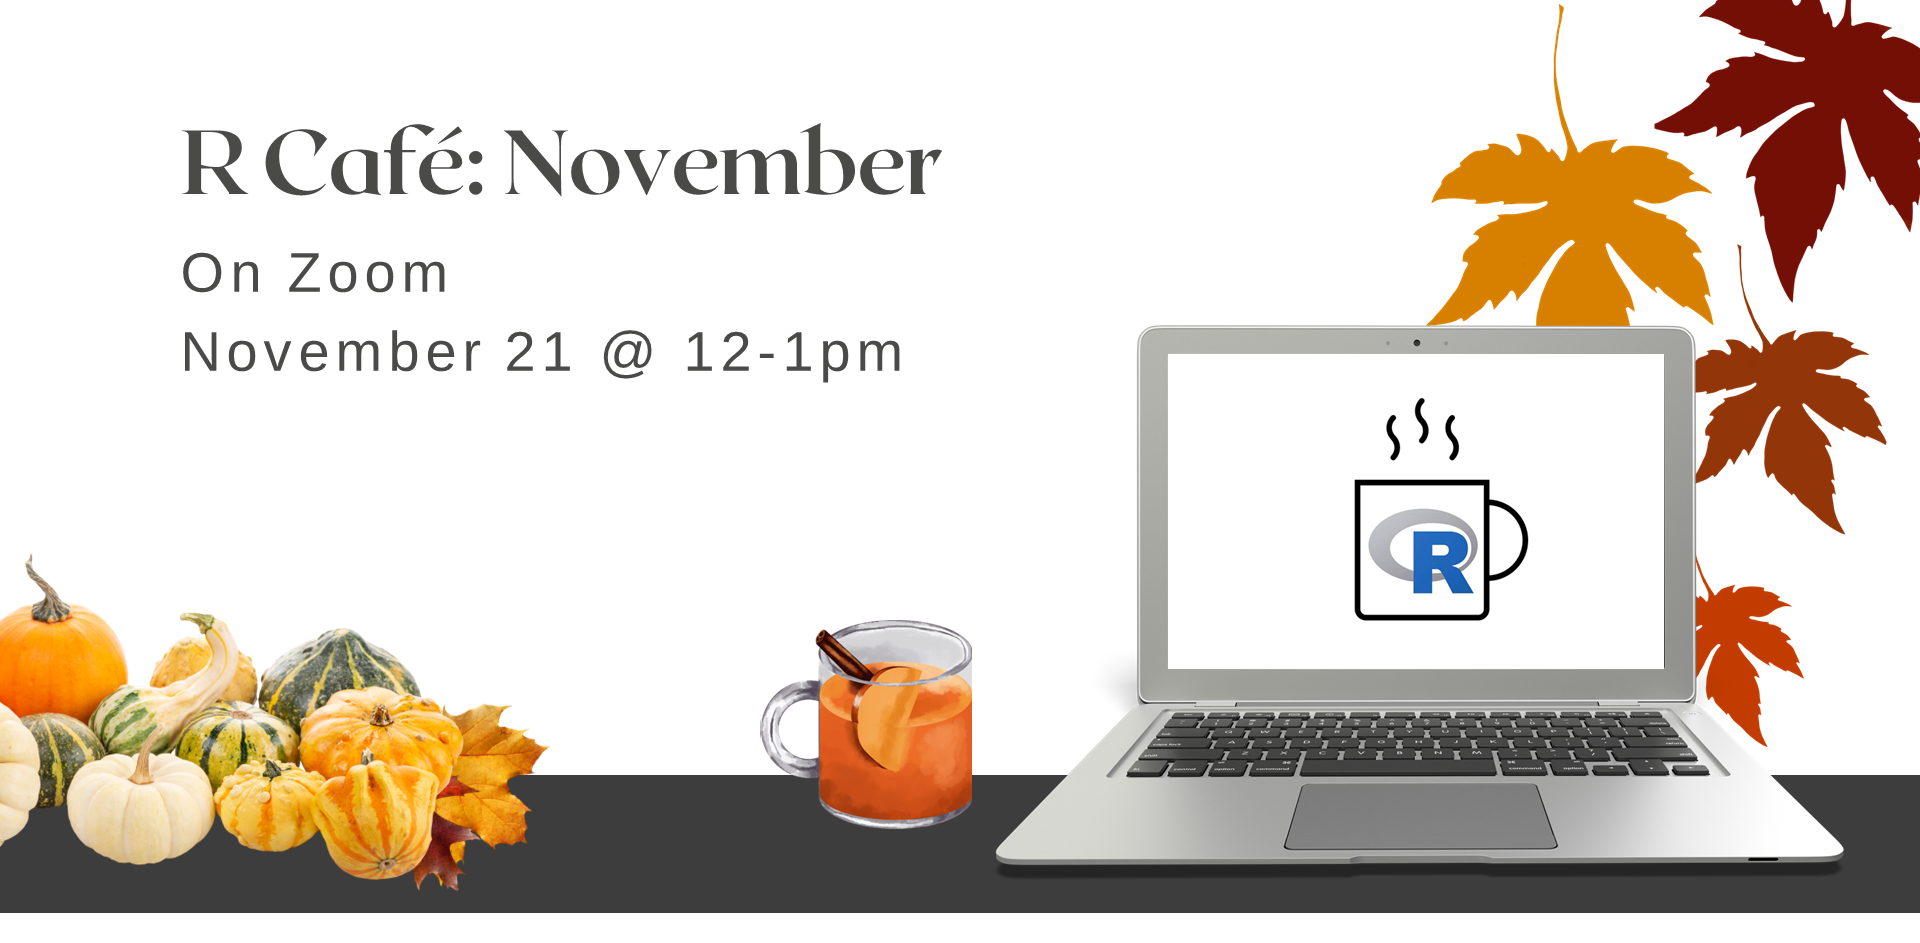 laptop with R Café logo, next to a mug of apple cider, pumpkin, and a background of falling leaves with text: R Café November on Zoom, November 21 at 12 to 1 pm